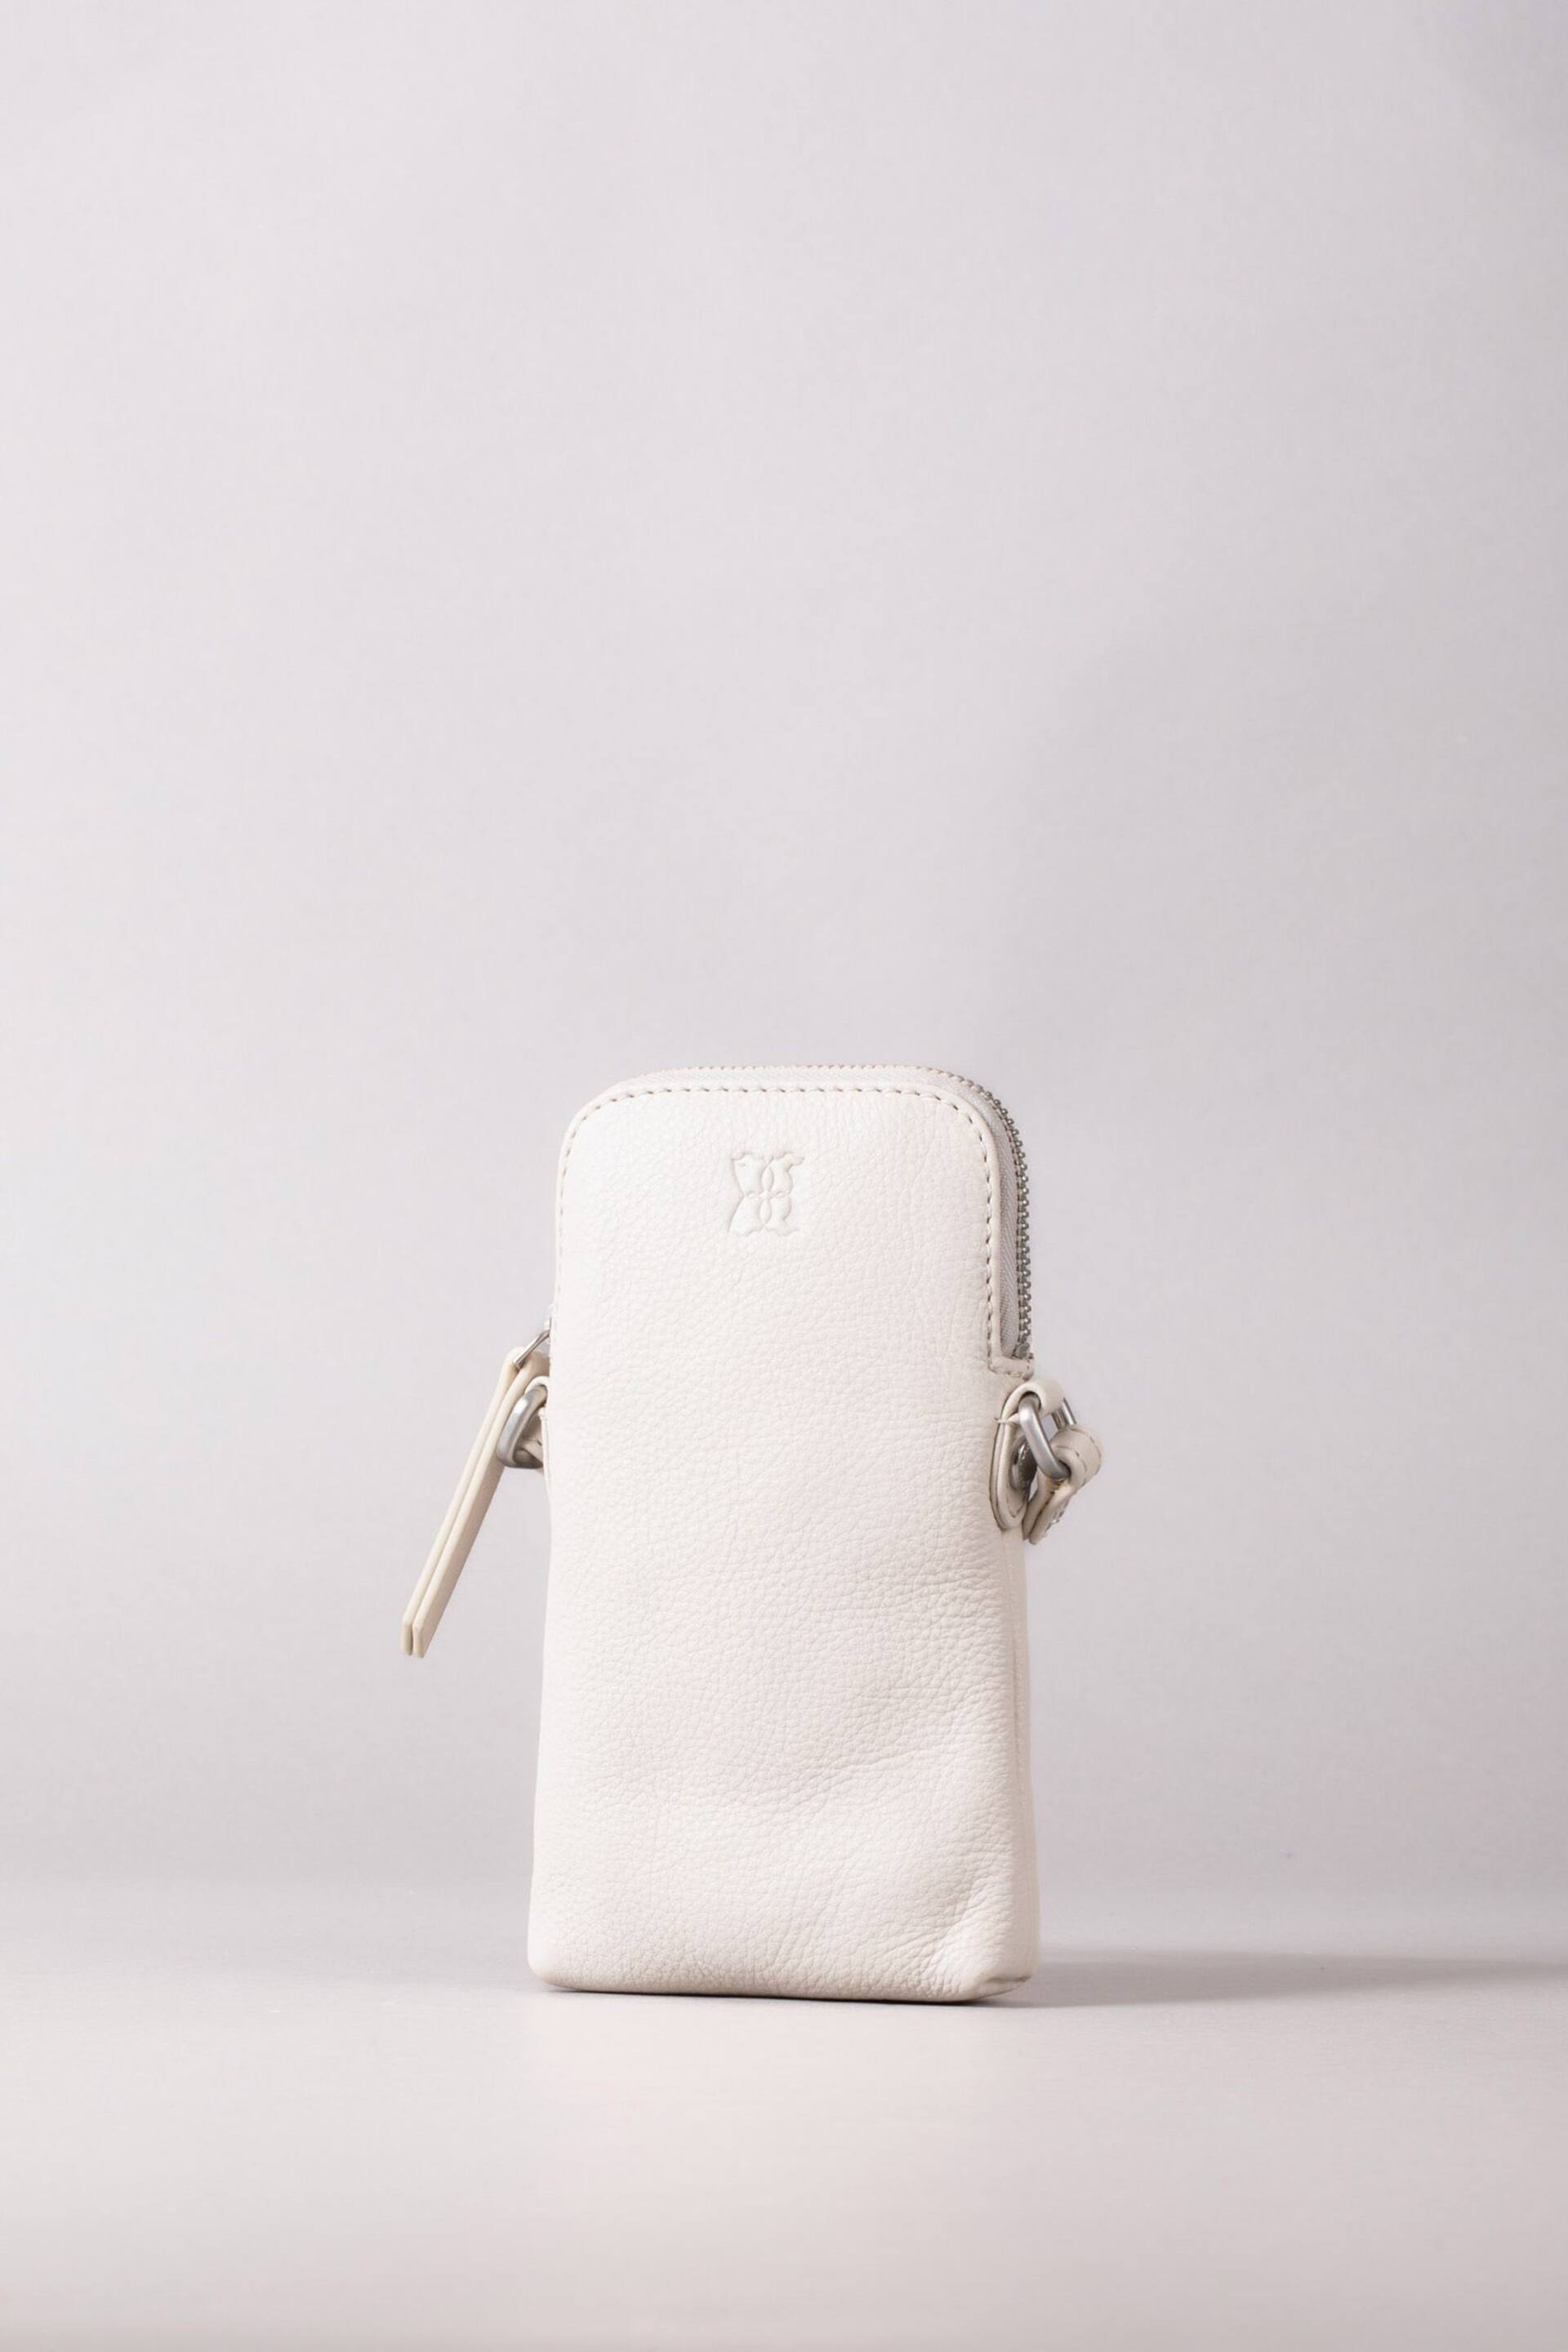 Lakeland Leather White Lakeland Leather Coniston Leather Cross Body Phone Pouch - Image 2 of 6